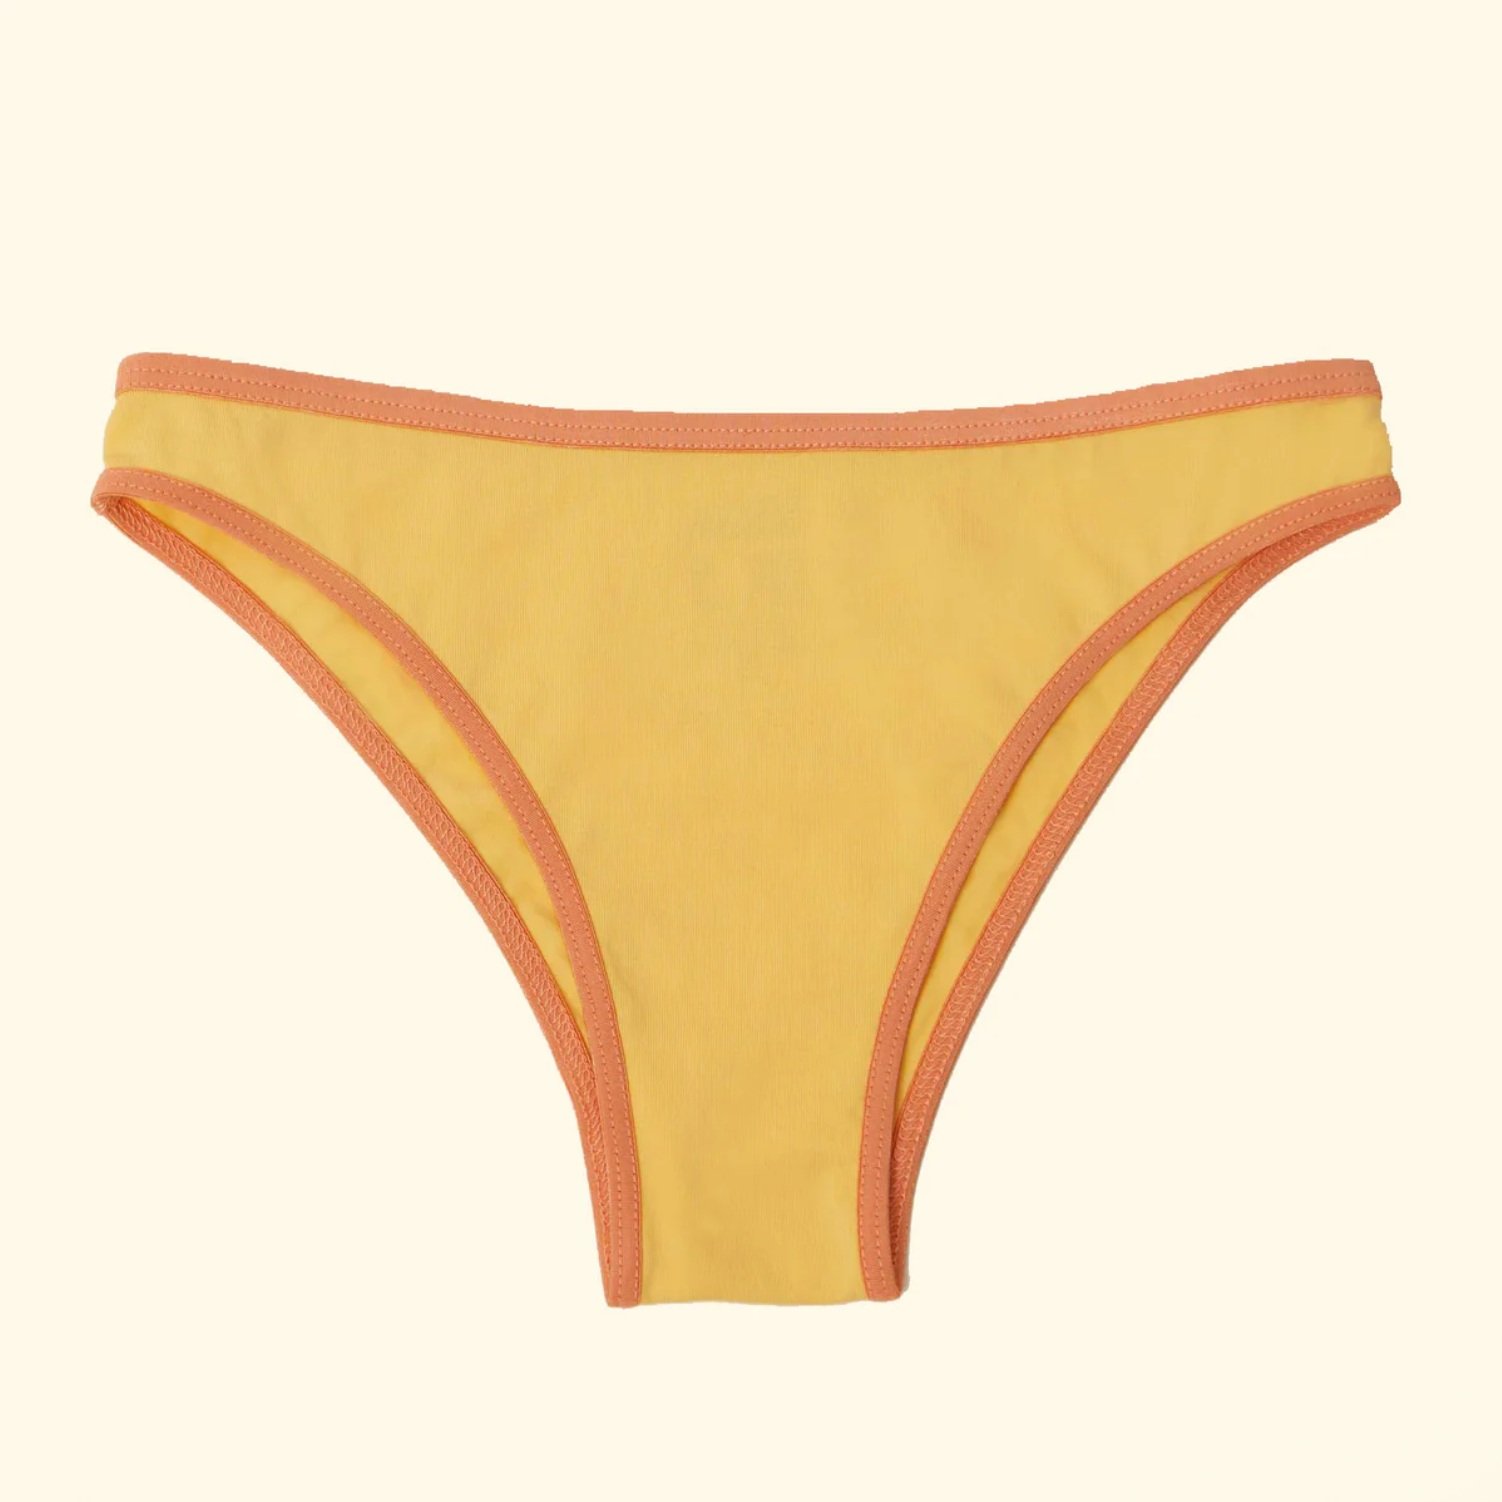 Underwear color meaning Blue-Wellness, Tranquility Yellow-Prosperity,  Success Red-Love, Romance White-Peace, Harmony What